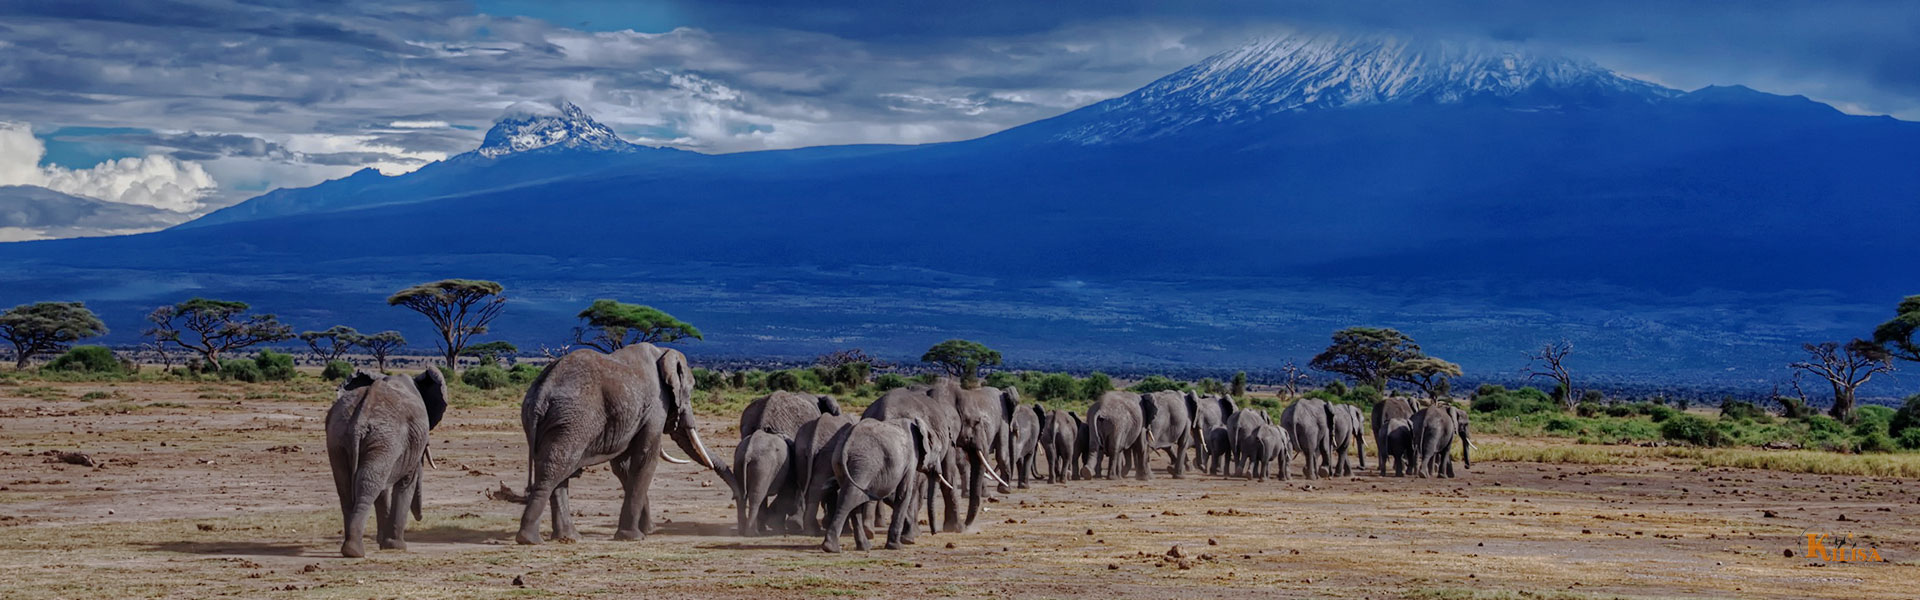 Wildlife of Mount Kilimanjaro, what animals can you see?